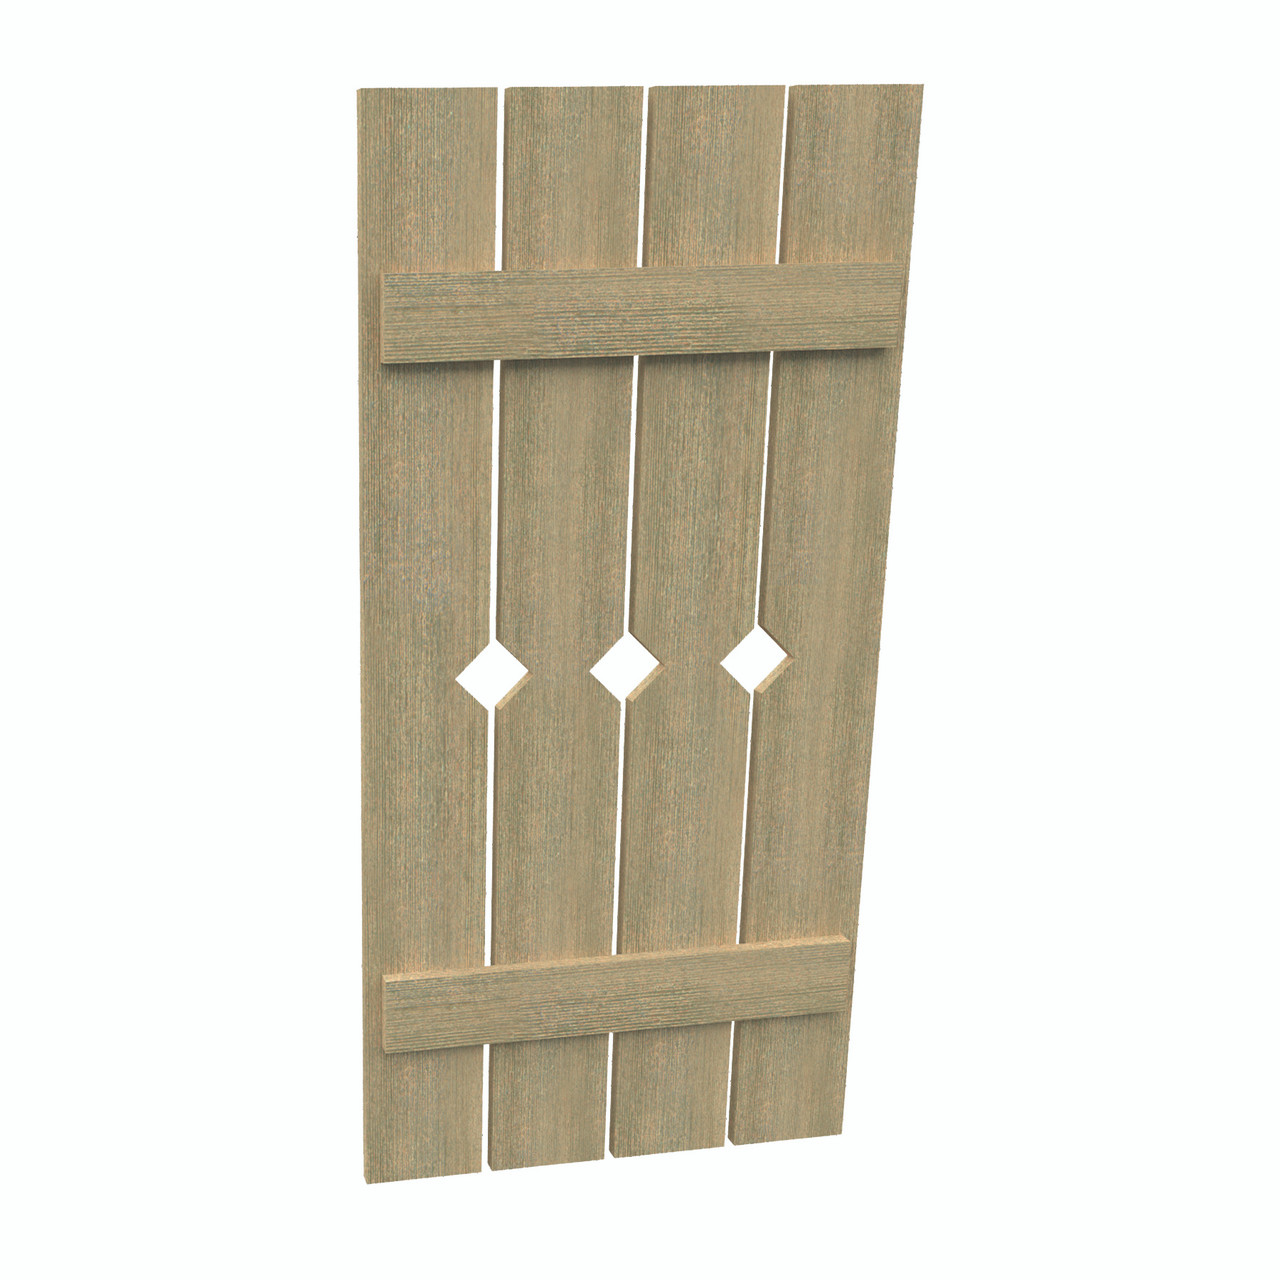 24 inch by 110 inch Plank Shutter with 4-Plank, Diamond